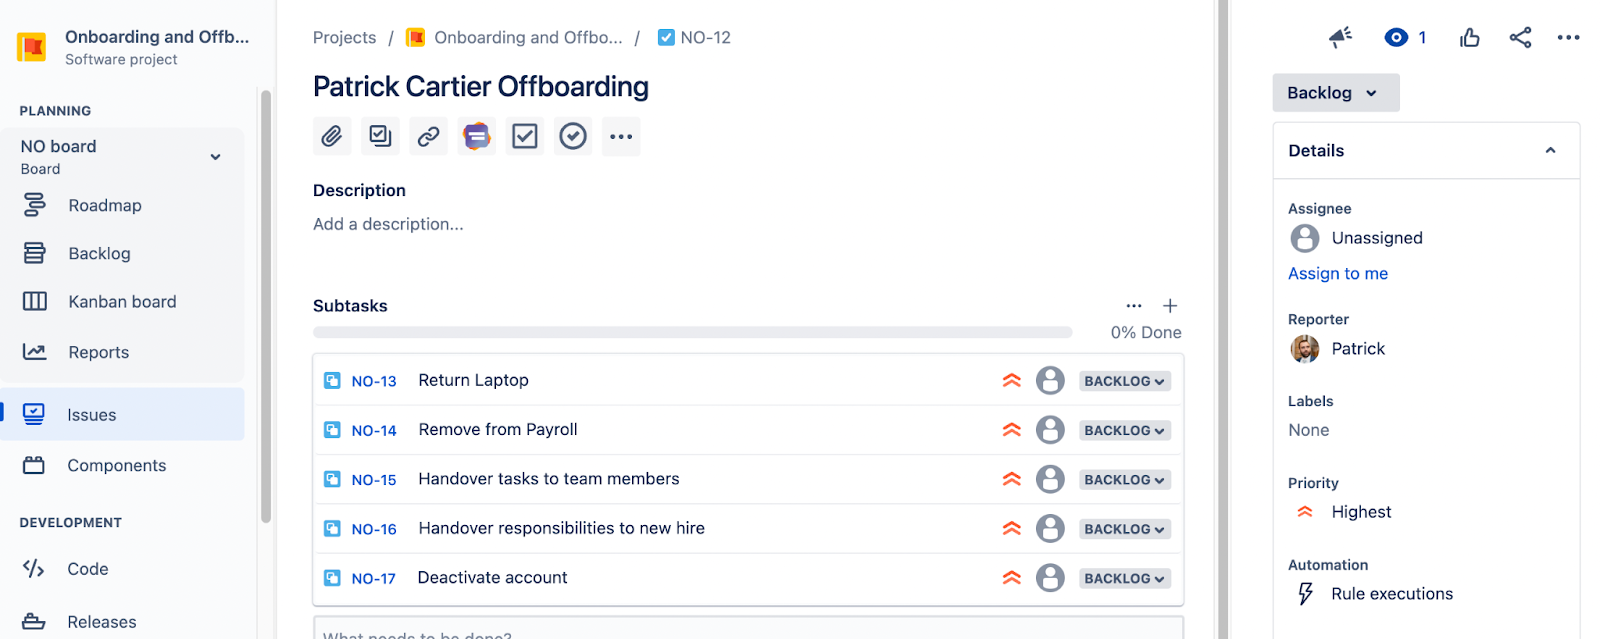 Simplify your offboarding processes with Easy Issues & Subtask Templates - Jira ticket with list of subtasks for offboarding Patrick Cartier